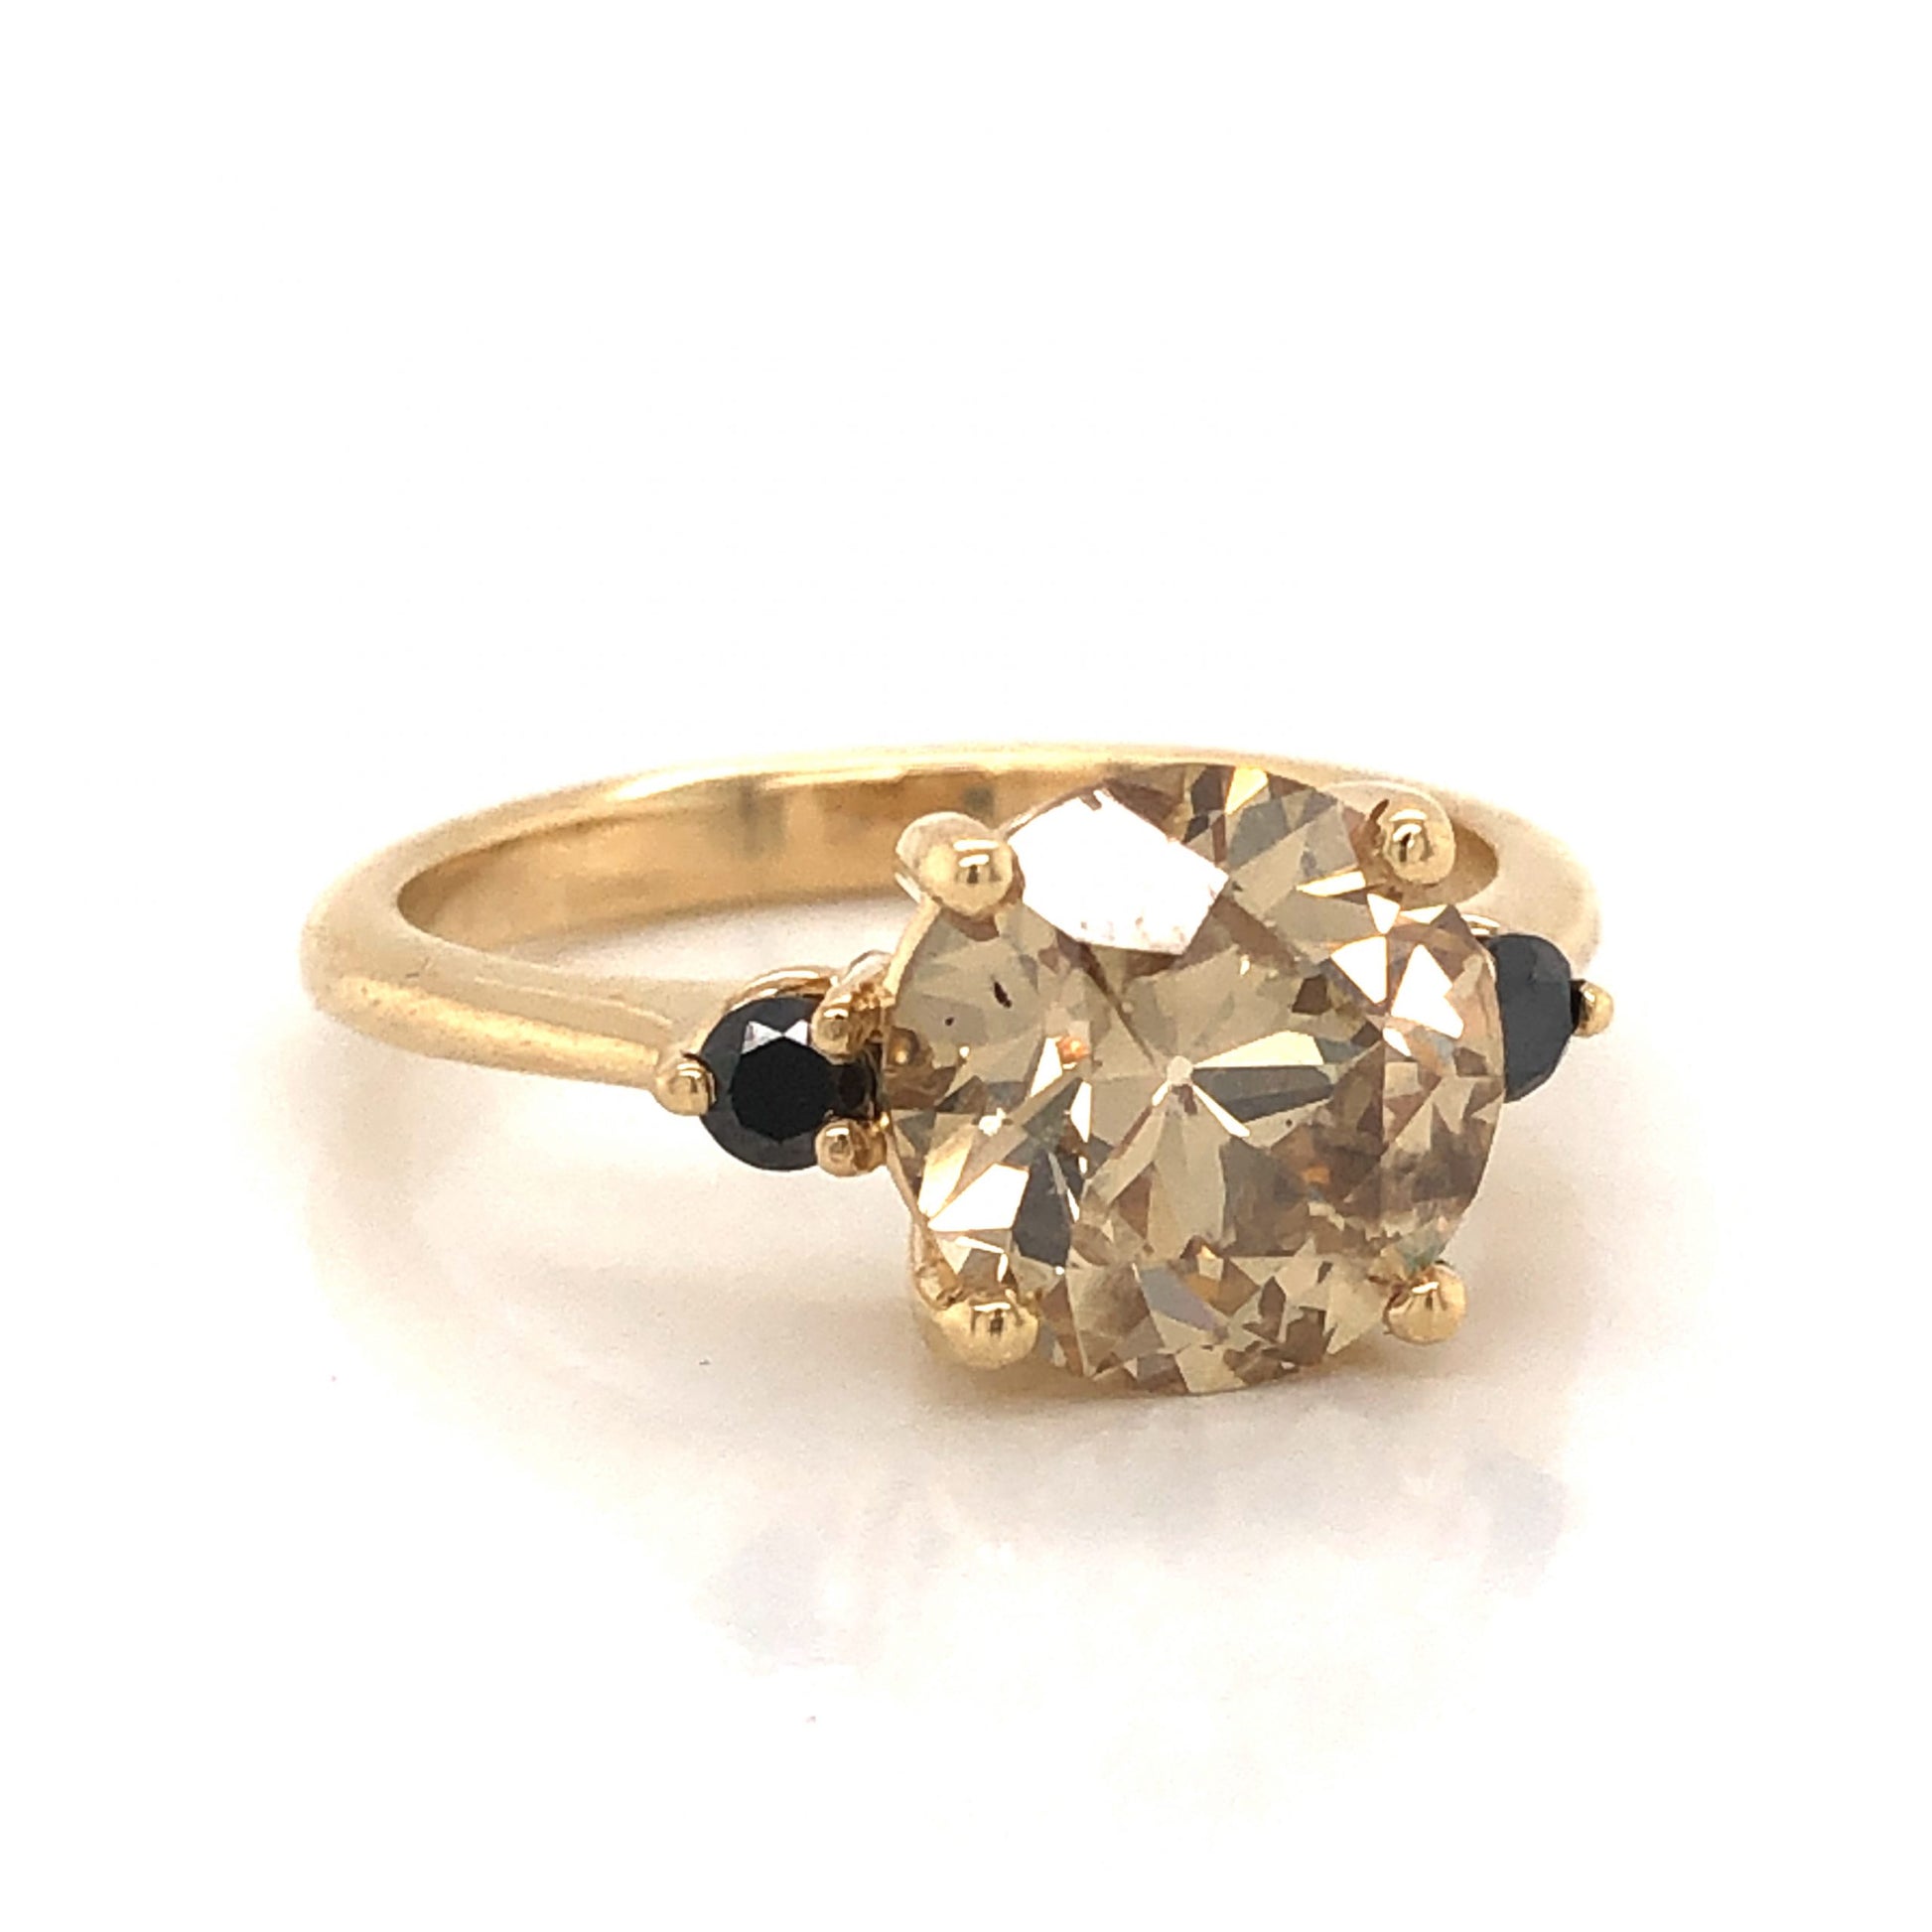 Fancy Light Brown Diamond Engagement Ring in 14k Yellow GoldComposition: 14 Karat Yellow GoldRing Size: 6.5Total Diamond Weight: 2.87 ctTotal Gram Weight: 3.6 gInscription: 14k 